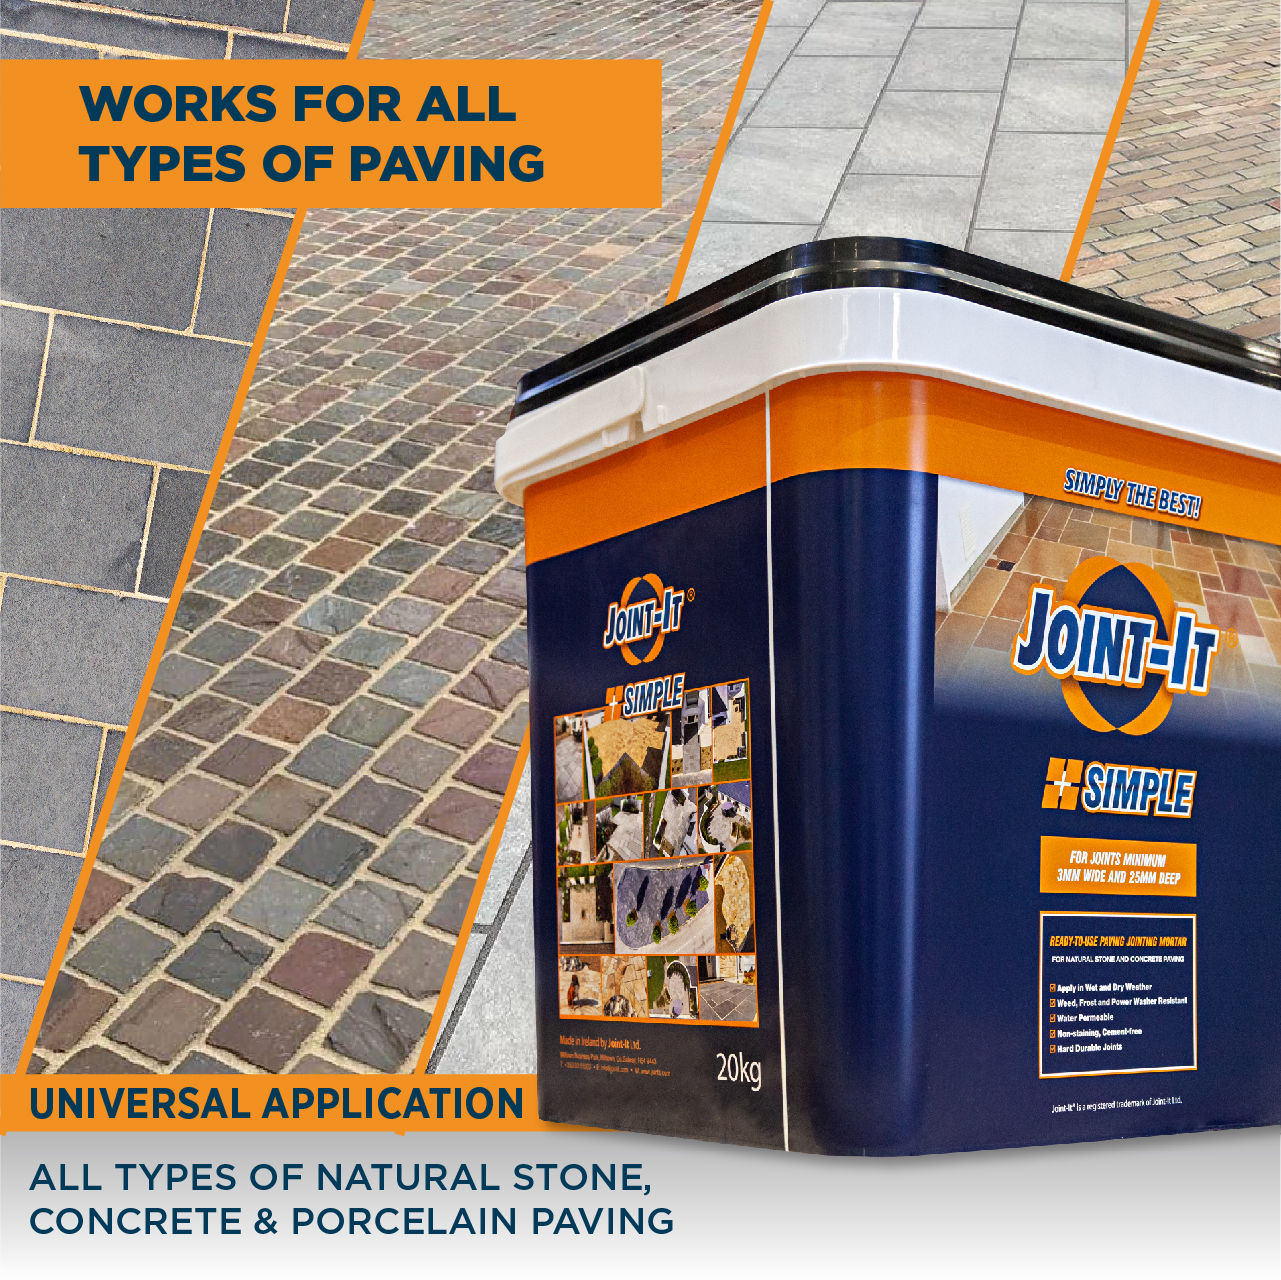 JOINT IT Paving Grout Jointing Mortar Patio Garden Paving Grout LIGHT GREY 20KG 